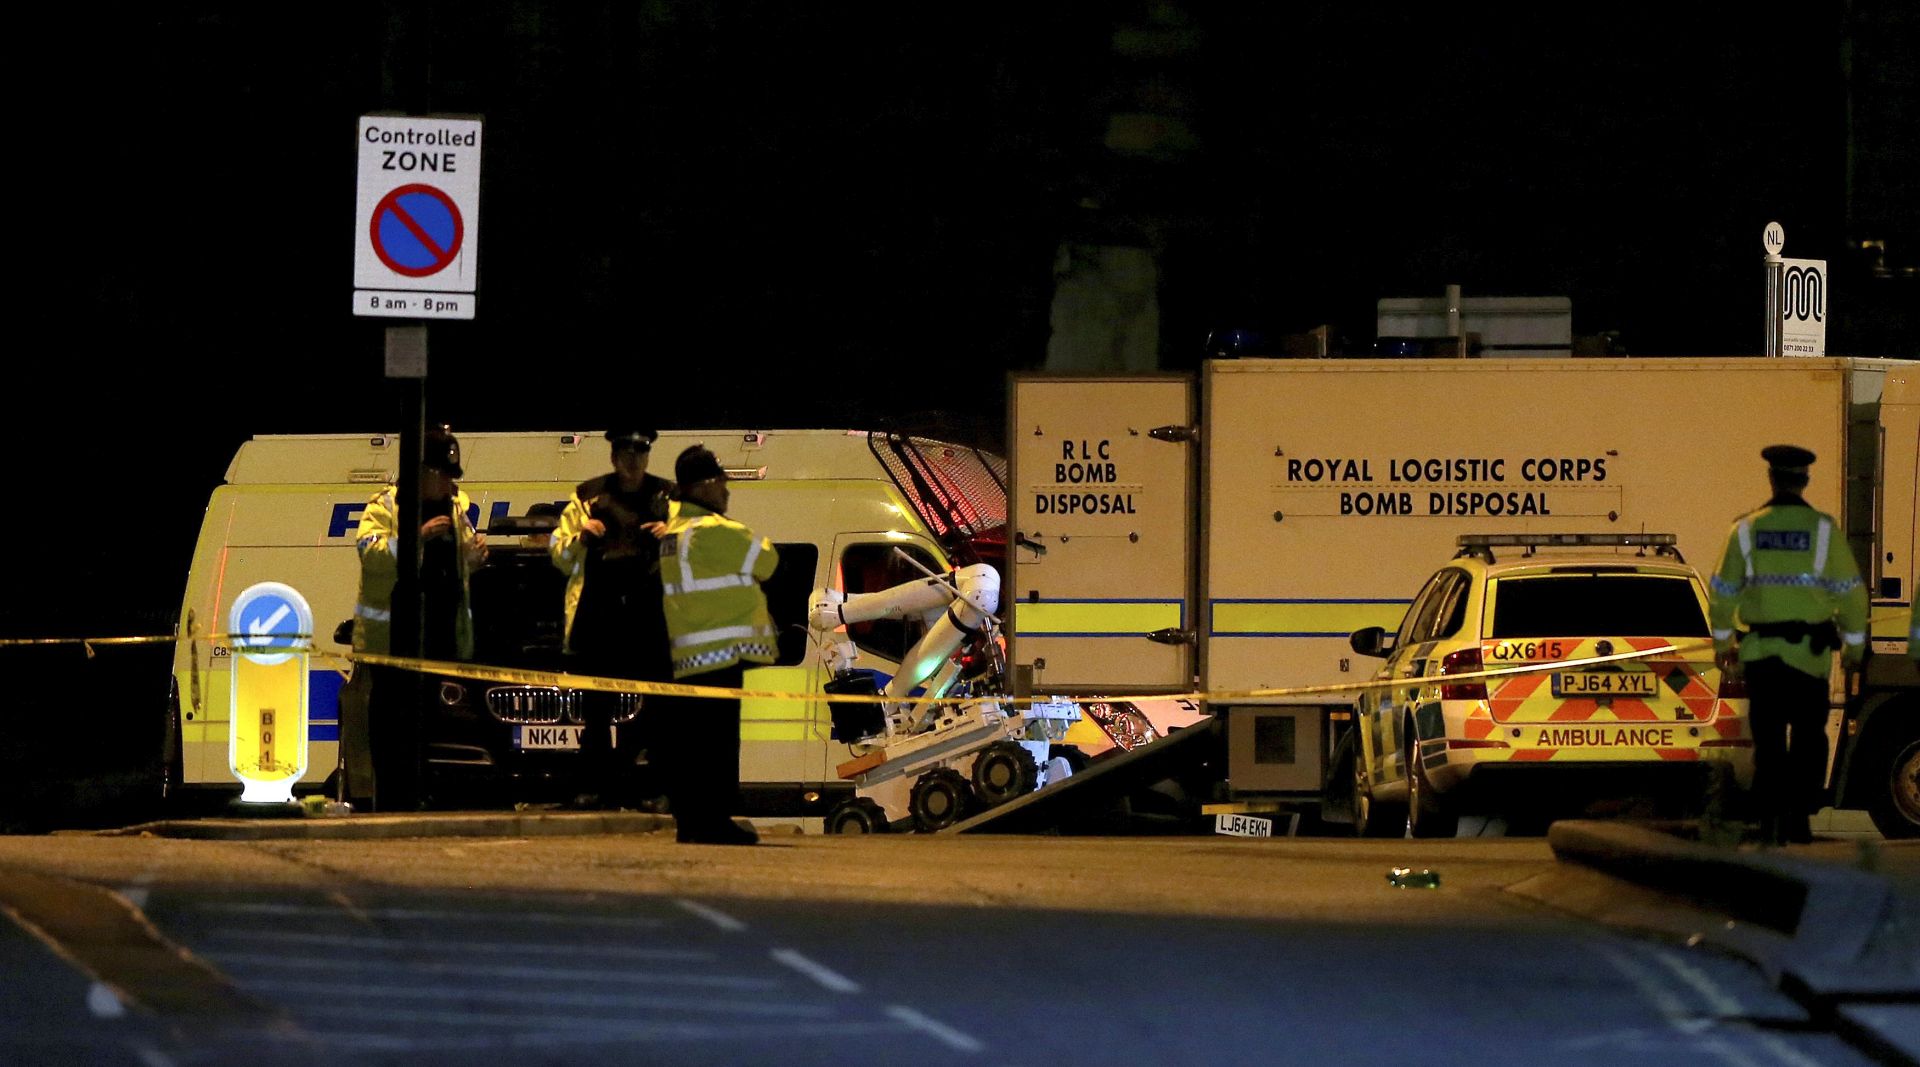 epa05982612 A Royal Logistic Corps (RLC) bomb disposal robot is unloaded outside the Manchester Arena following reports of an explosion, in Manchester, Britain, 23 May 2017. According to a statement released by the Greater Manchester Police on 23 May 2017, police responded to reports of an explosion at Manchester Arena on 22 May 2017 evening. At least 19 people have been confirmed dead and others 50 were injured, authorities said. The happening is currently treated as a terrorist incident until police know otherwise. According to reports quoting witnesses, a mass evacuation was prompted after explosions were heard at the end of US singer Ariana Grande's concert in the arena.  EPA/NIGEL RODDIS